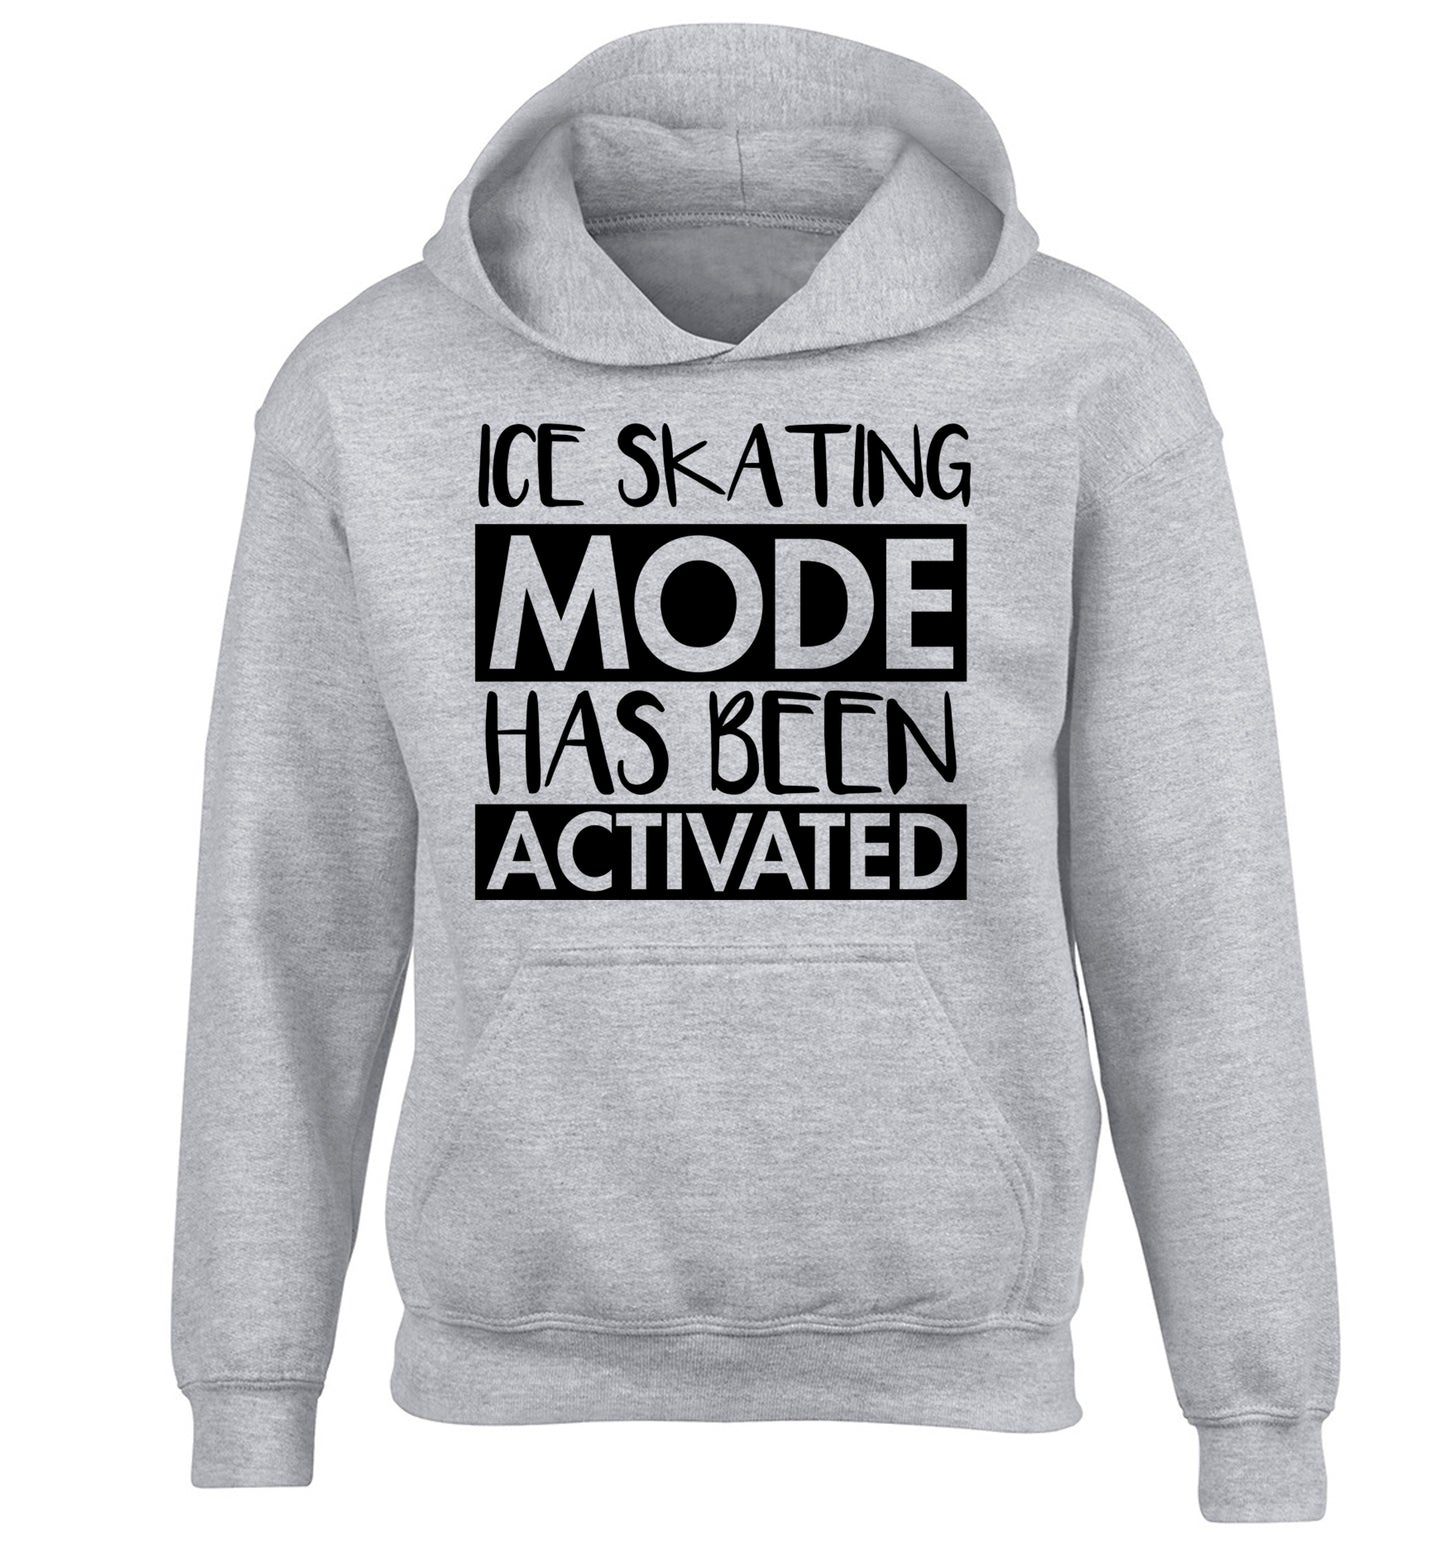 Ice skating mode activated children's grey hoodie 12-14 Years